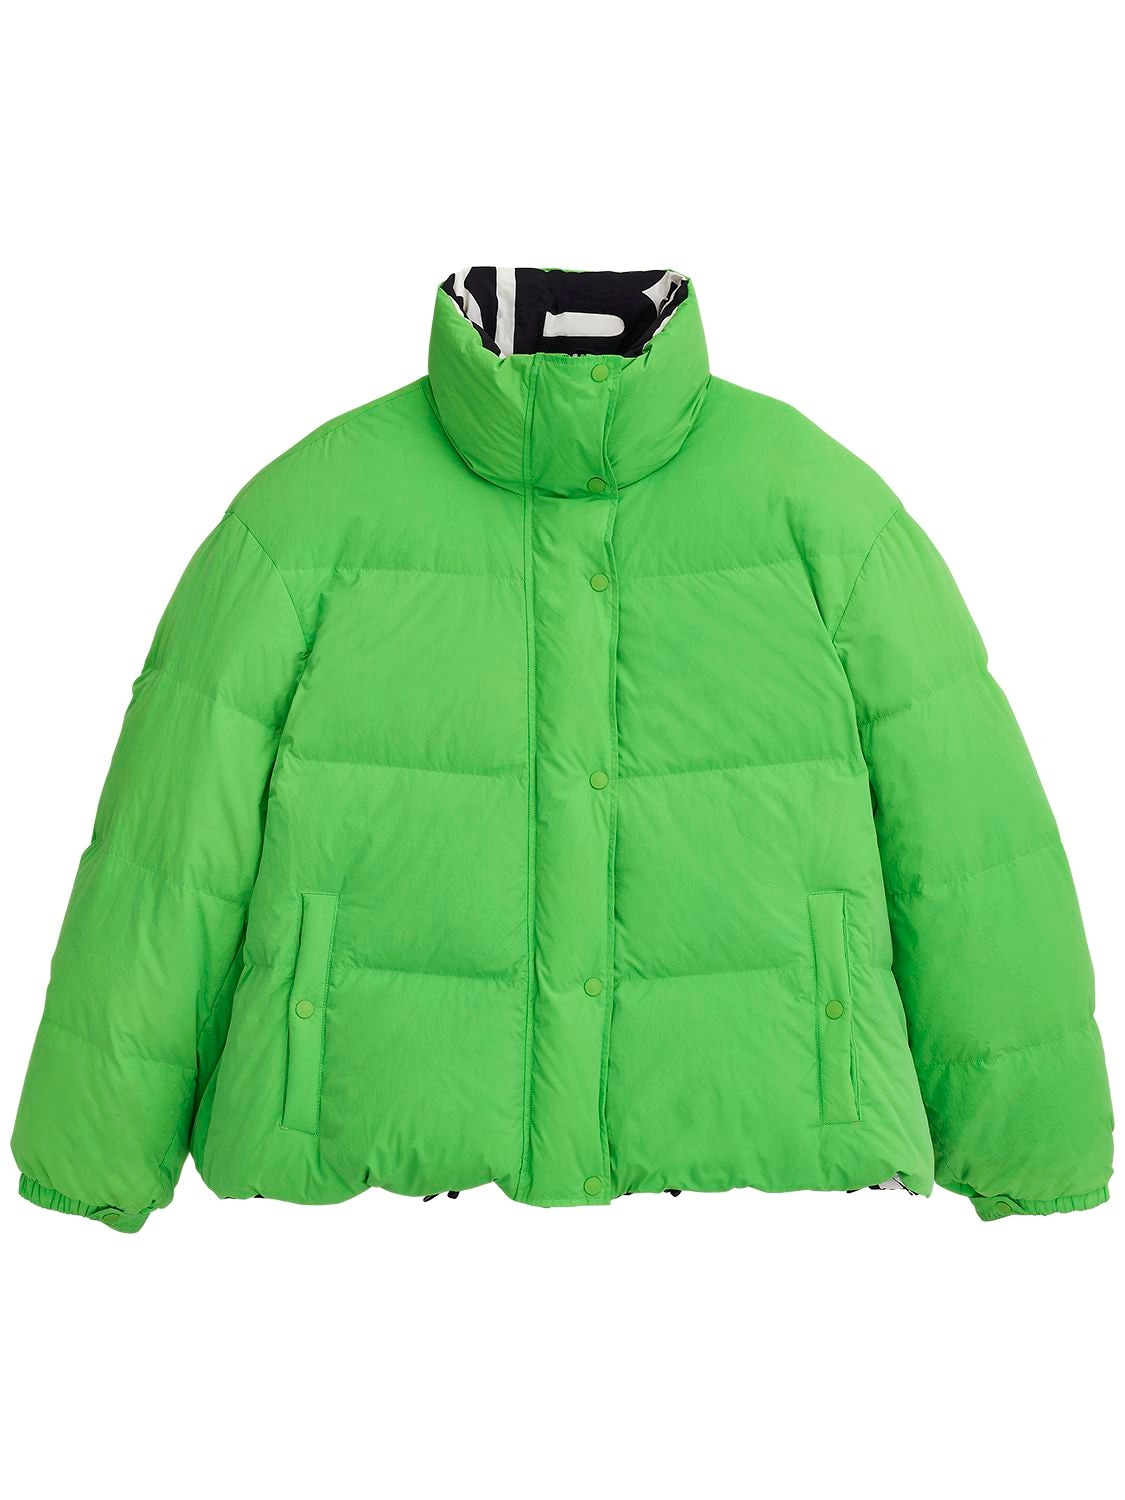 Marc Jacobs Reversible Puffer Jacket In Lime Green